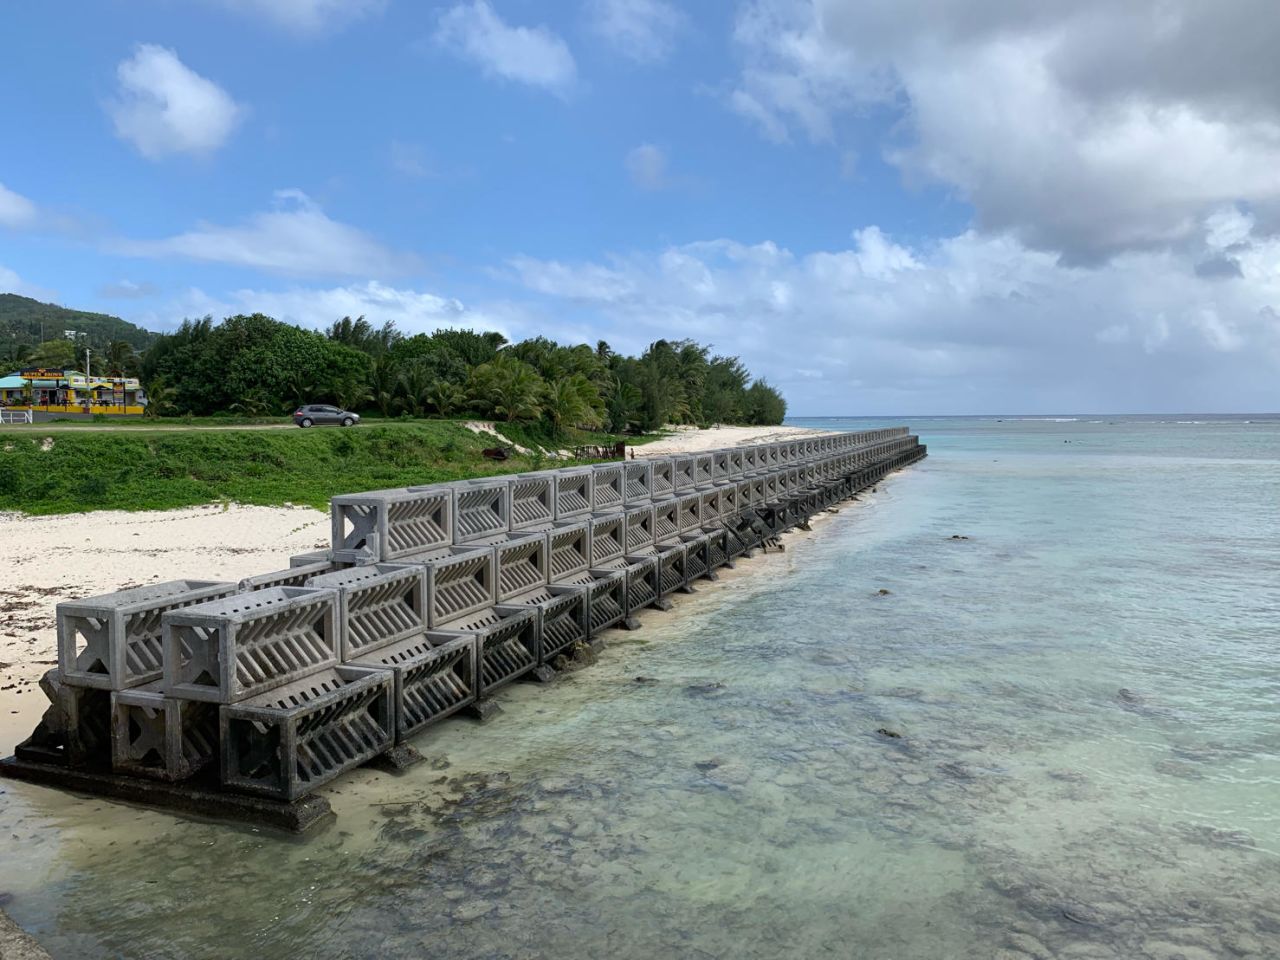 This seawall on the beach off Rarotonga, Cook Islands, uses fiber-reinforced concrete armour units to help dissipate wave energy while allowing water to pass through.  